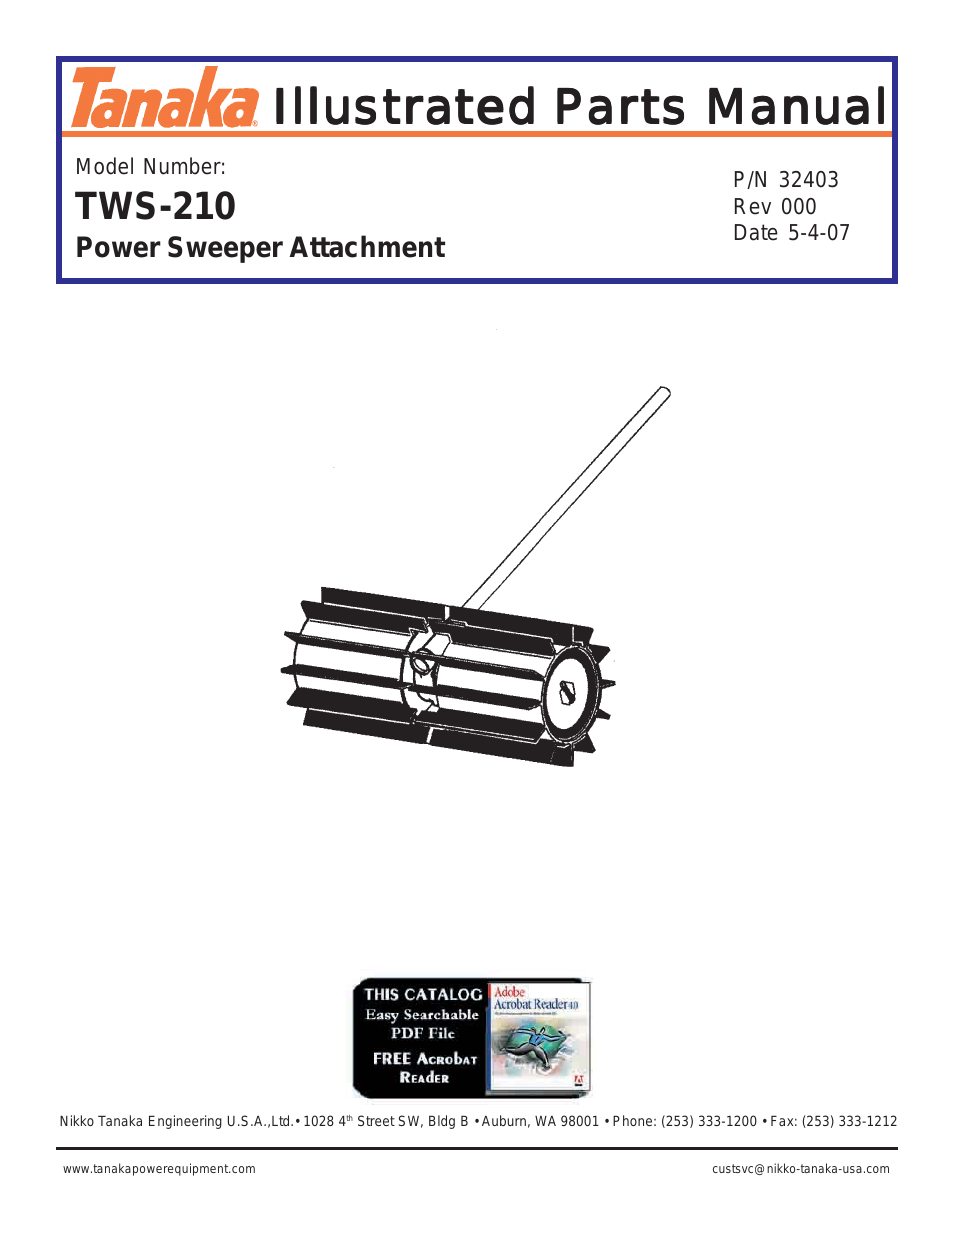 Power Sweeper Attachment TSW-210